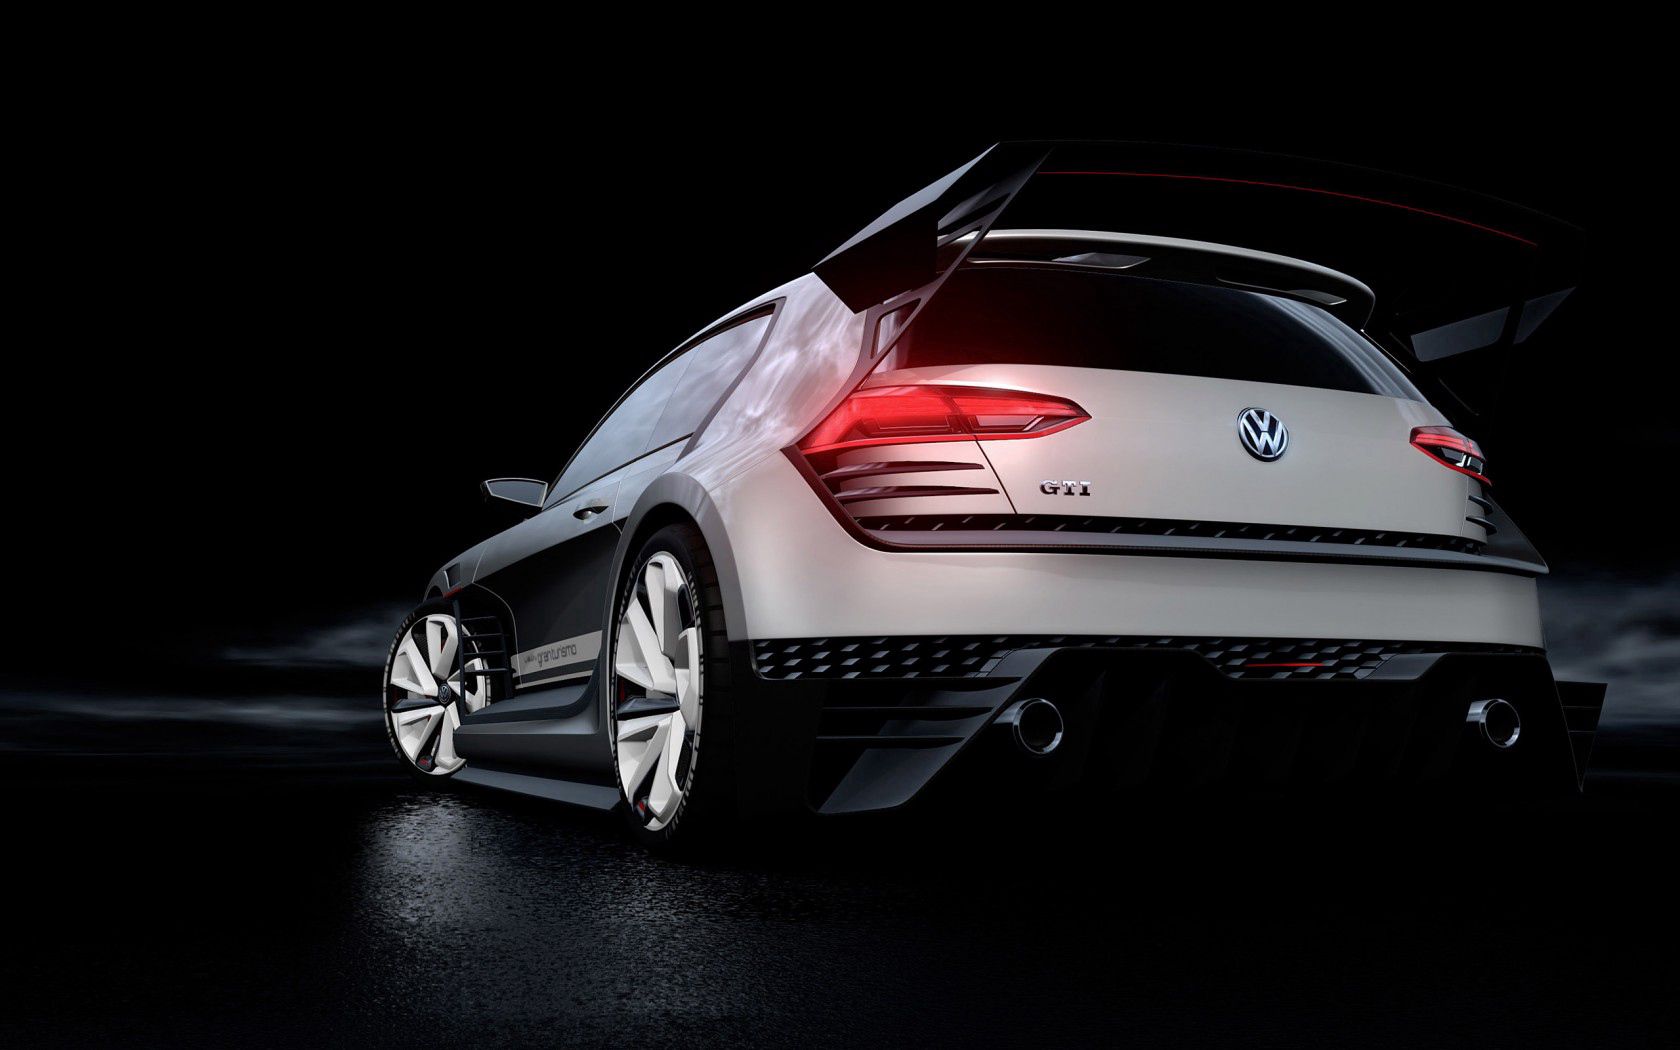 Concept back view, style, gti, cars Lock Screen